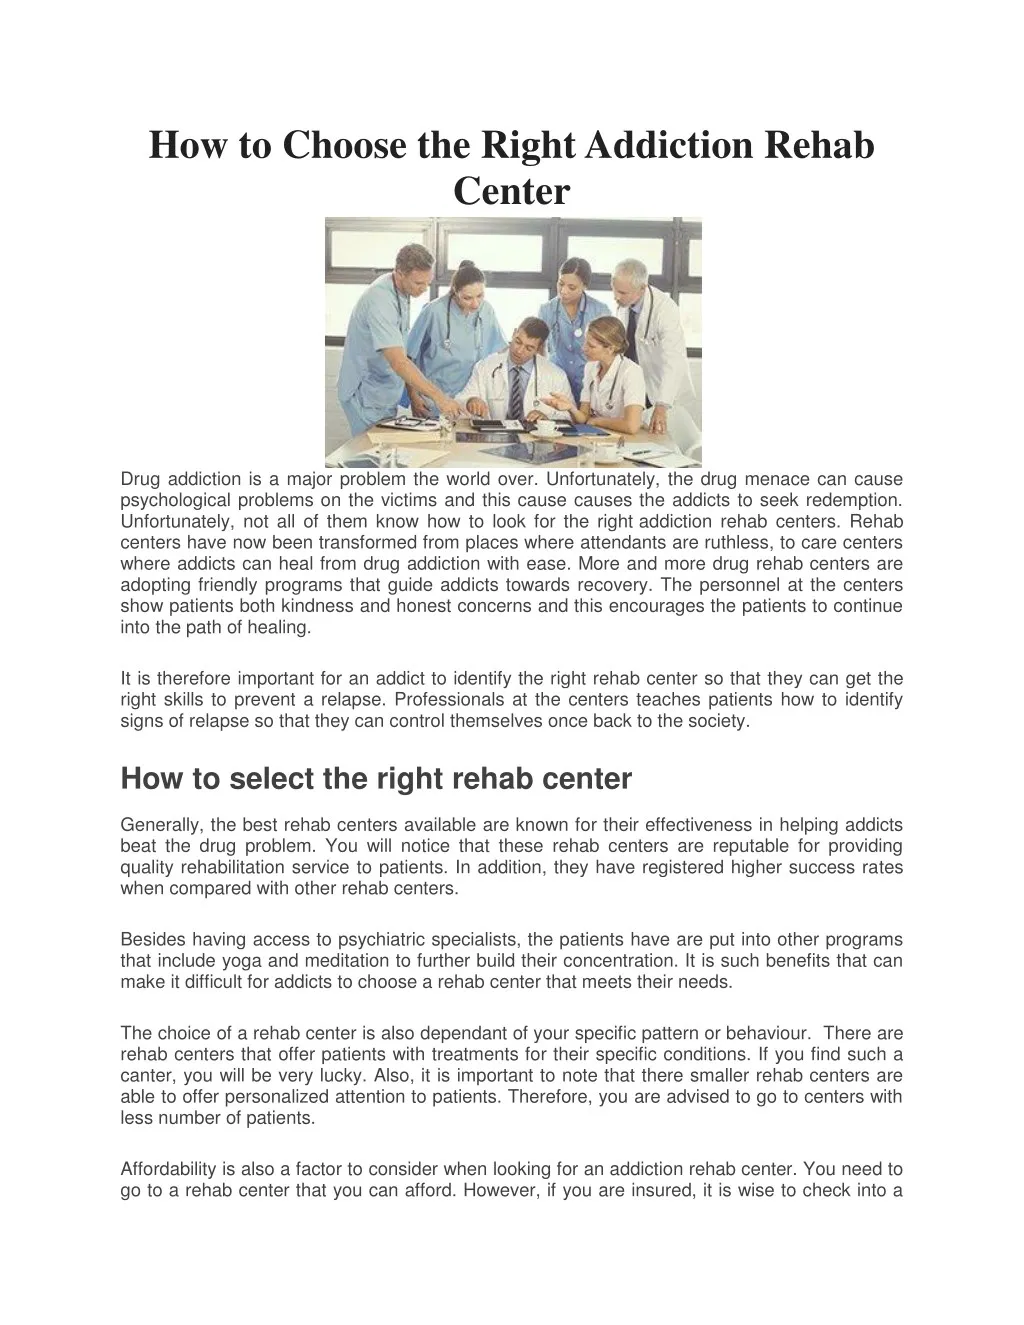 how to choose the right addiction rehab center